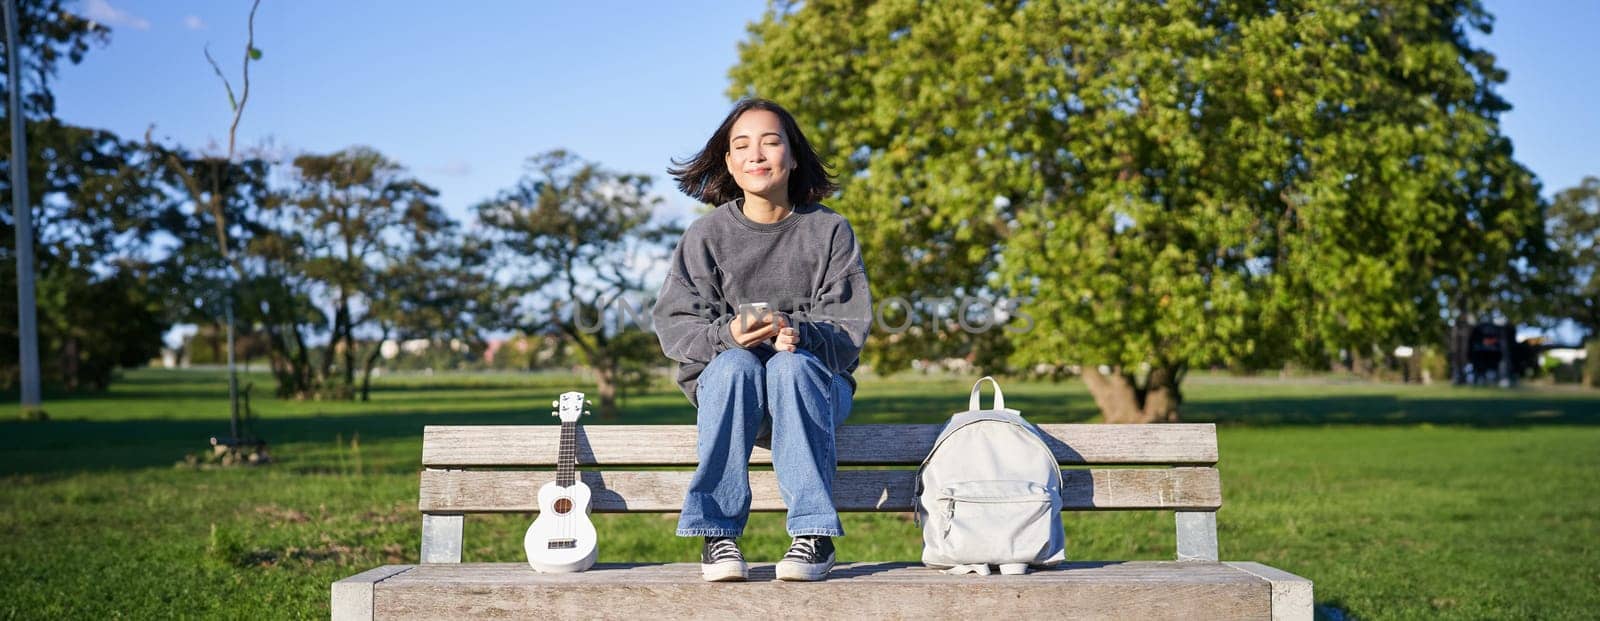 Young woman with ukulele, sitting on bench in park, using mobile phone app, holding smartphone and smiling by Benzoix